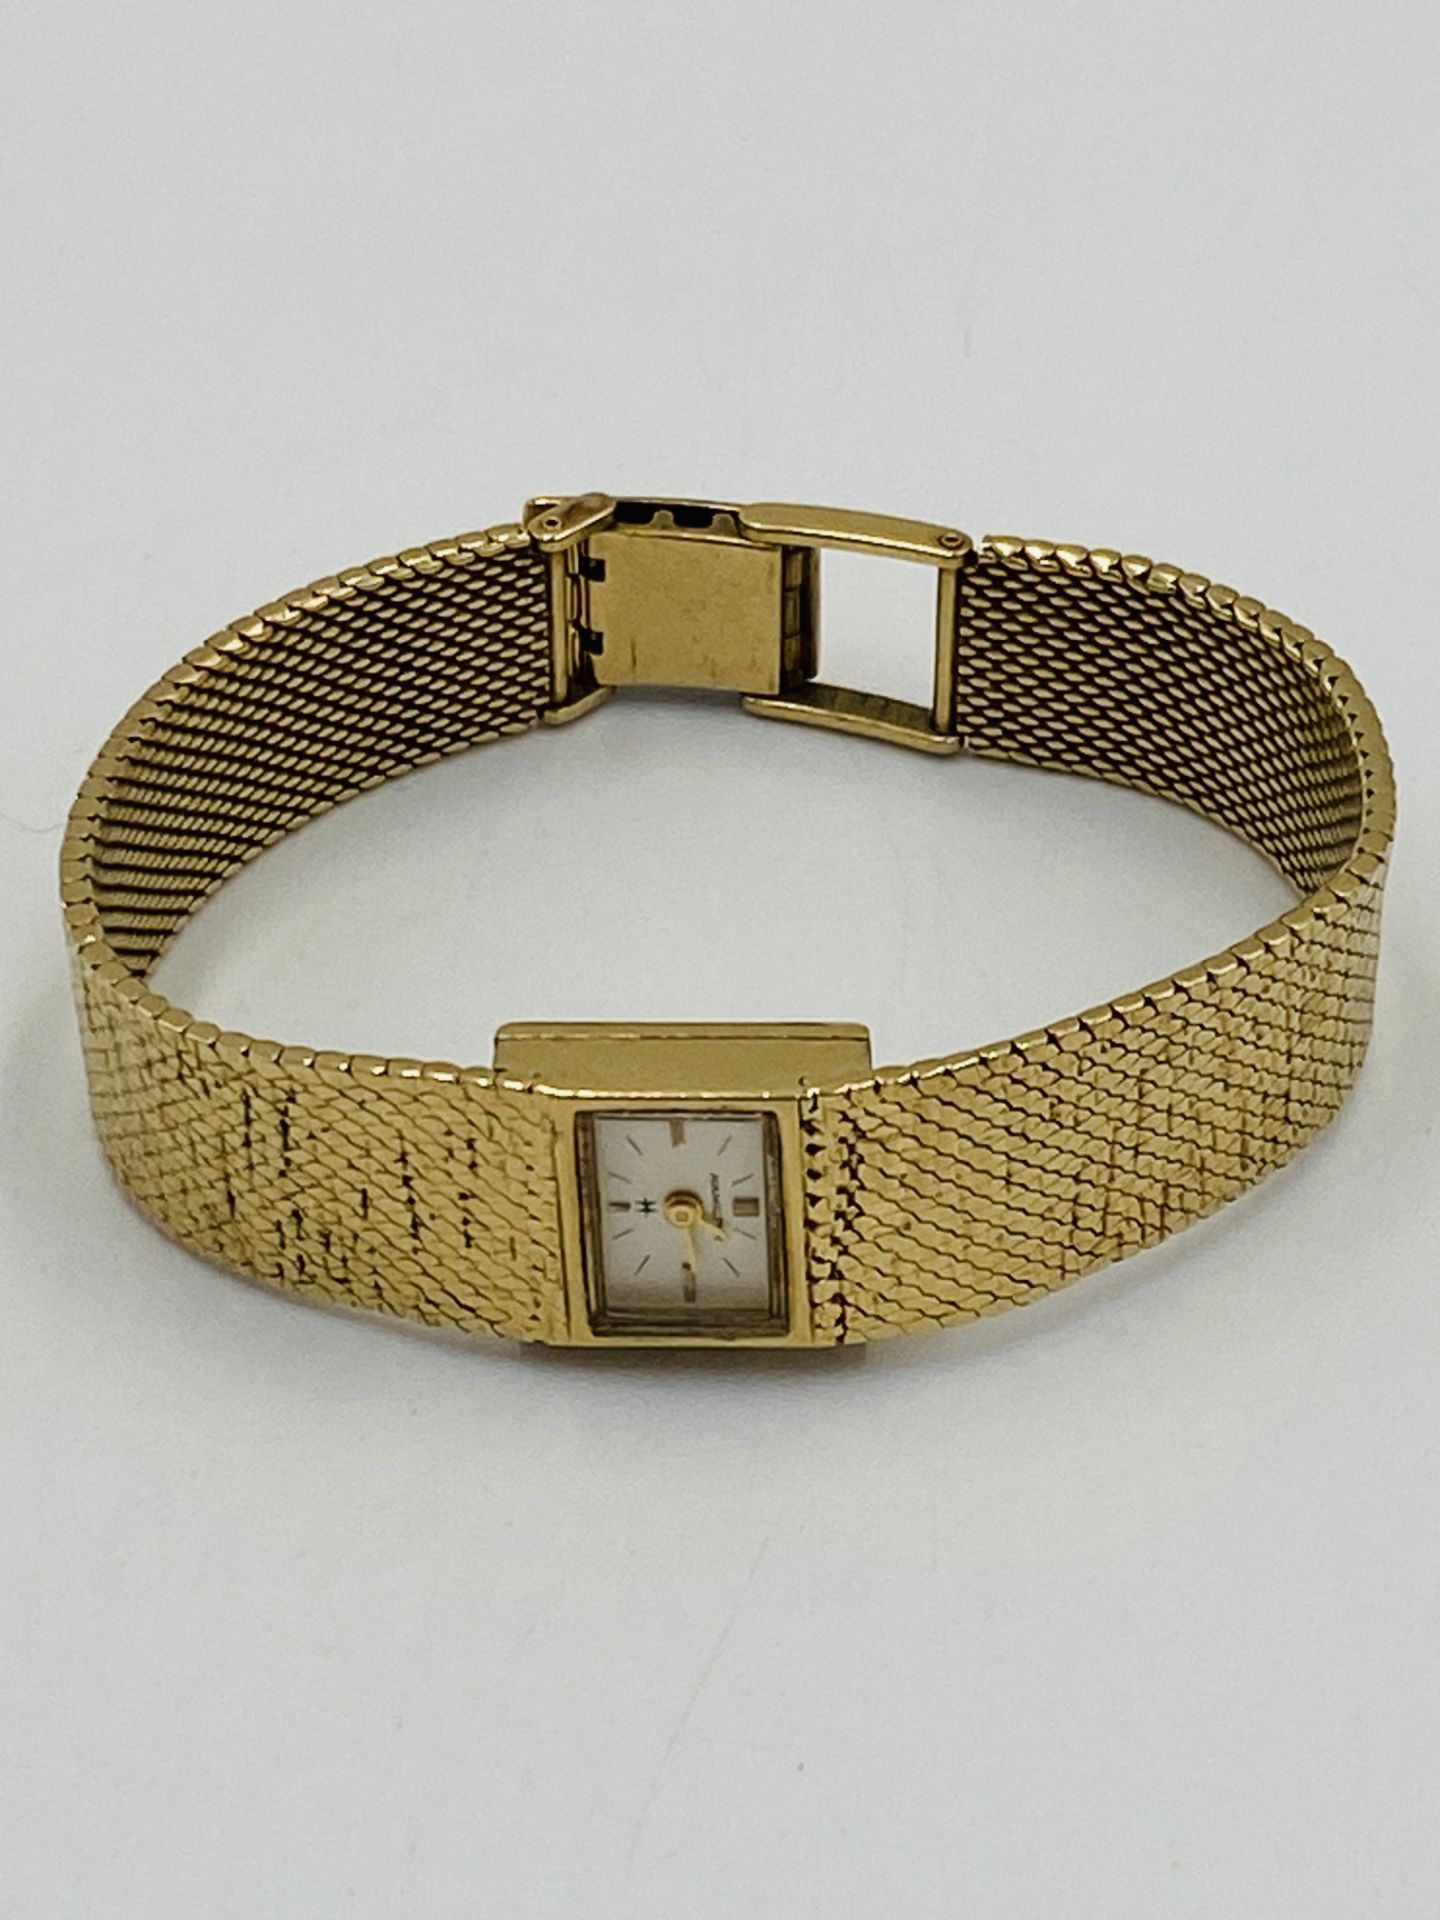 Hamilton wristwatch in 9ct gold case - Image 5 of 6